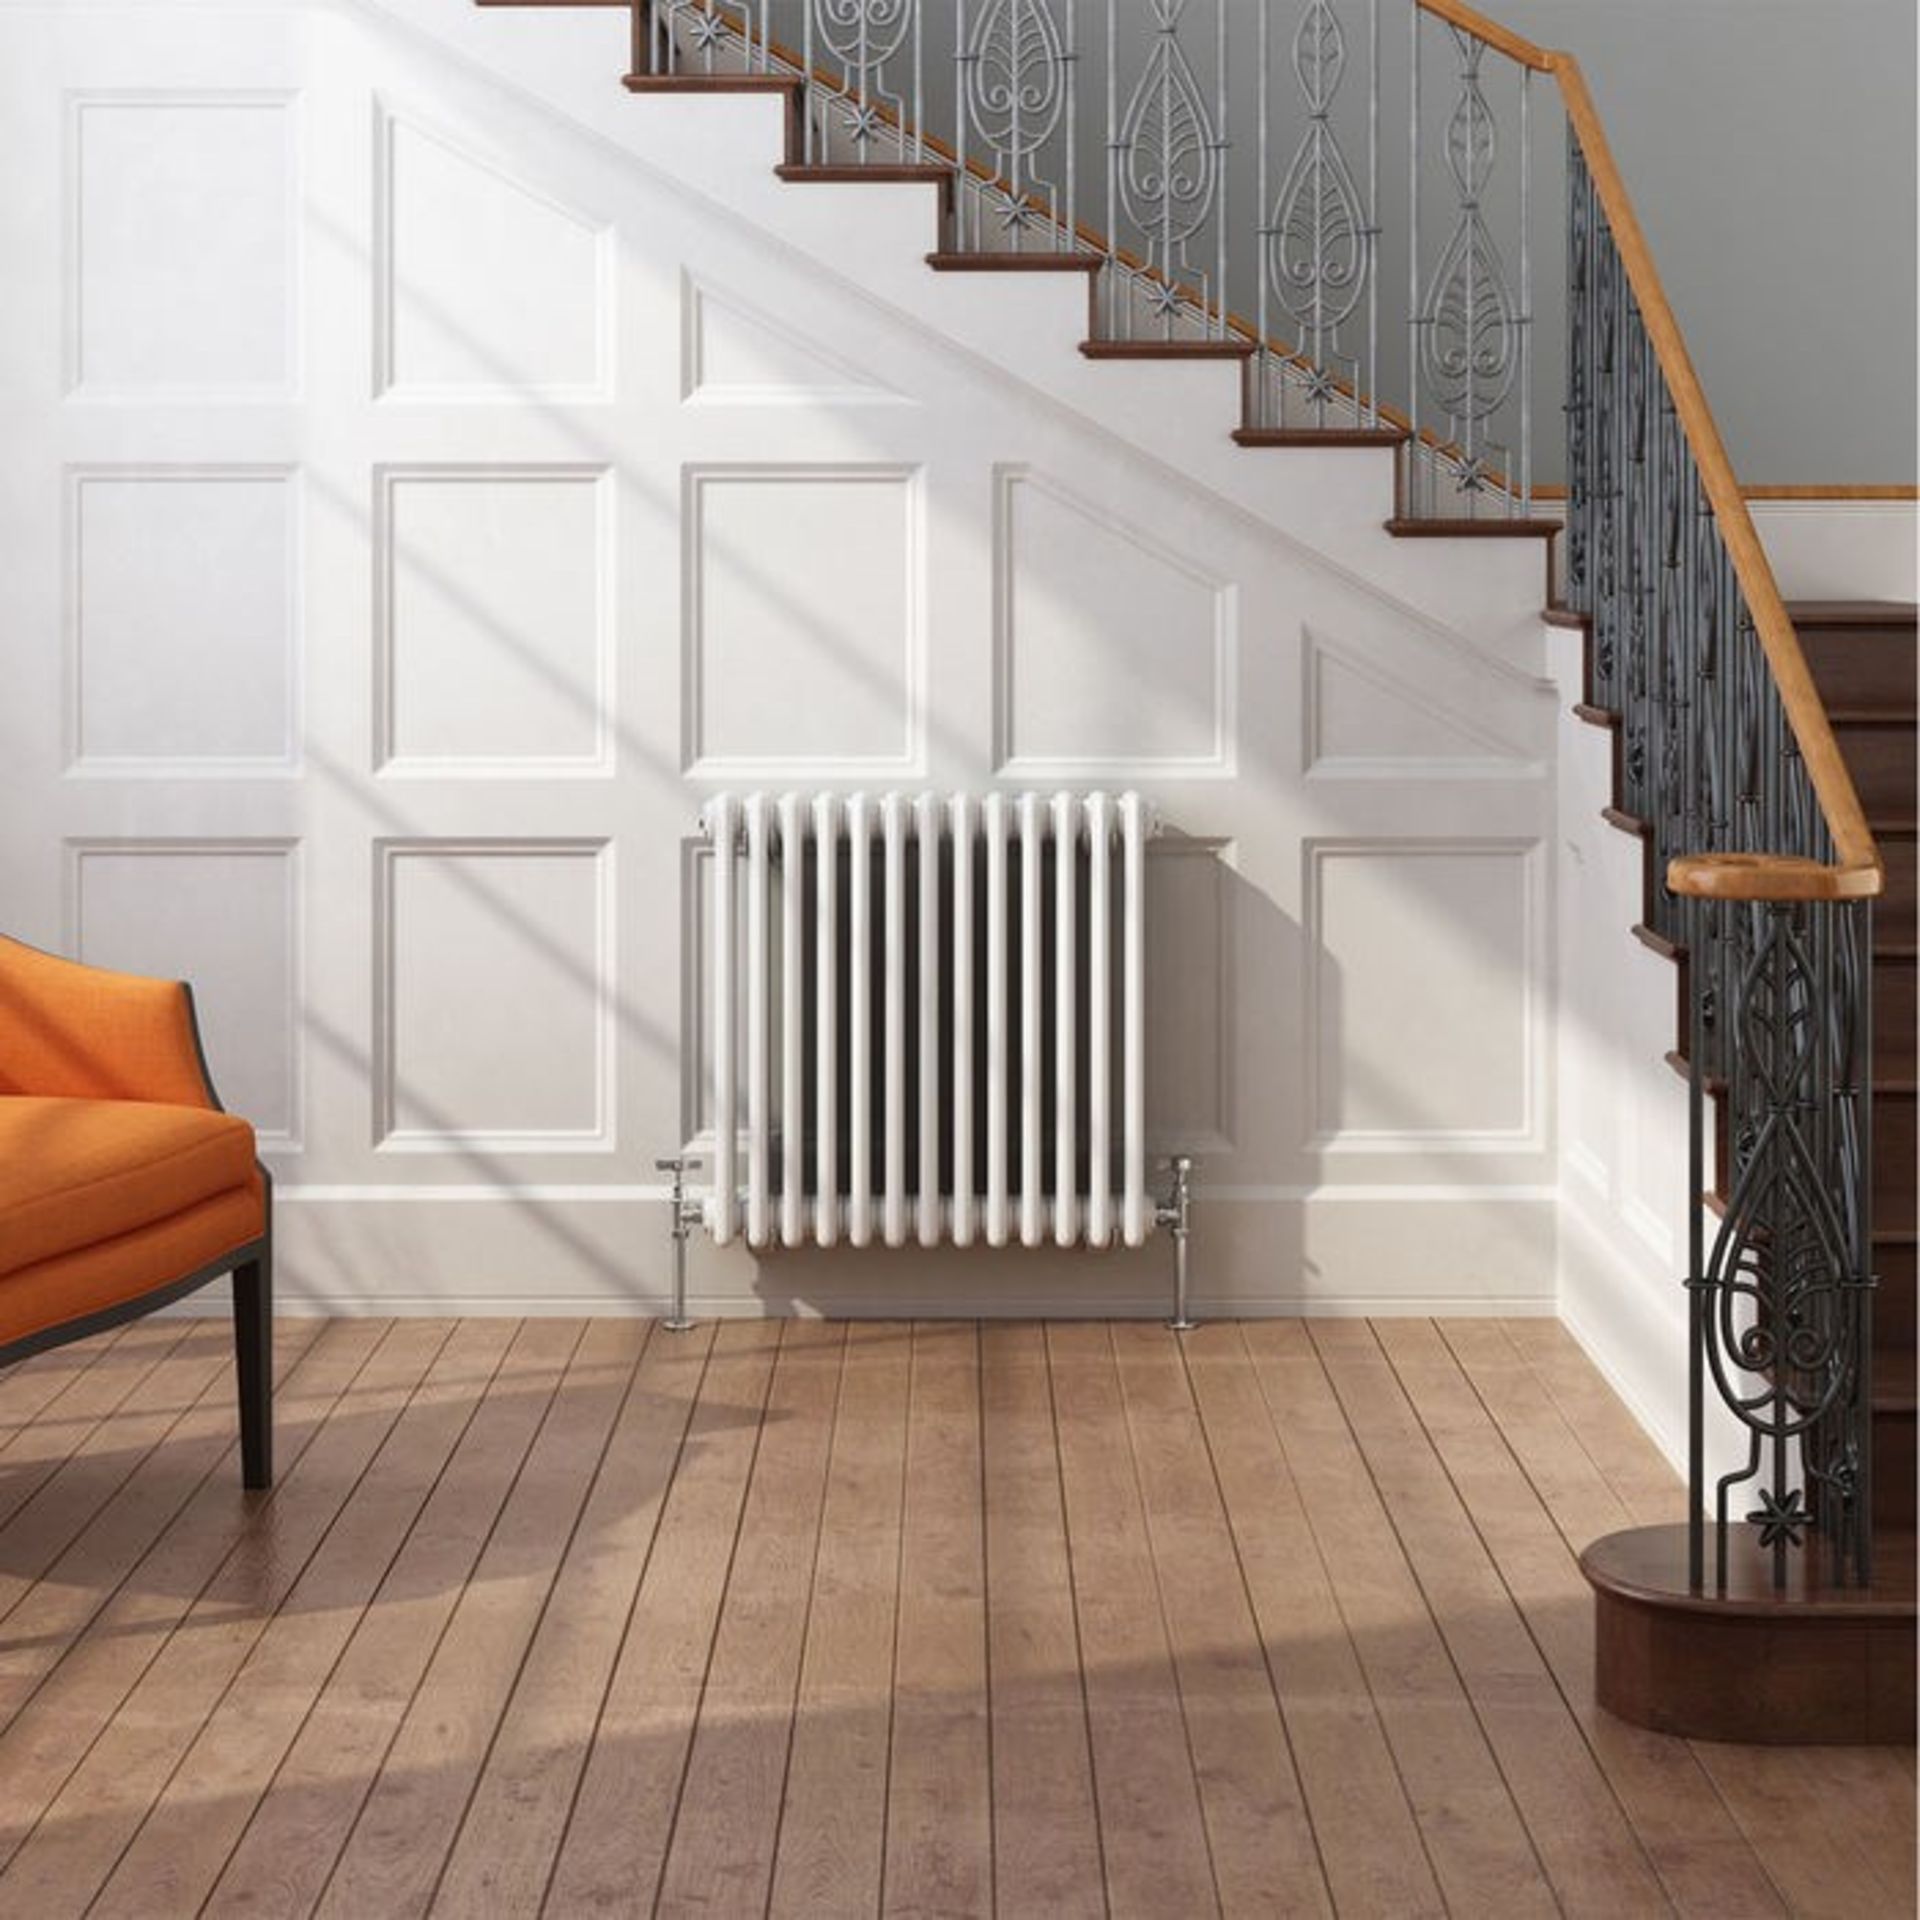 (XL40) 600x628mm White Double Panel Horizontal Colosseum Traditional Radiator. RRP £344.99.For... - Image 2 of 2